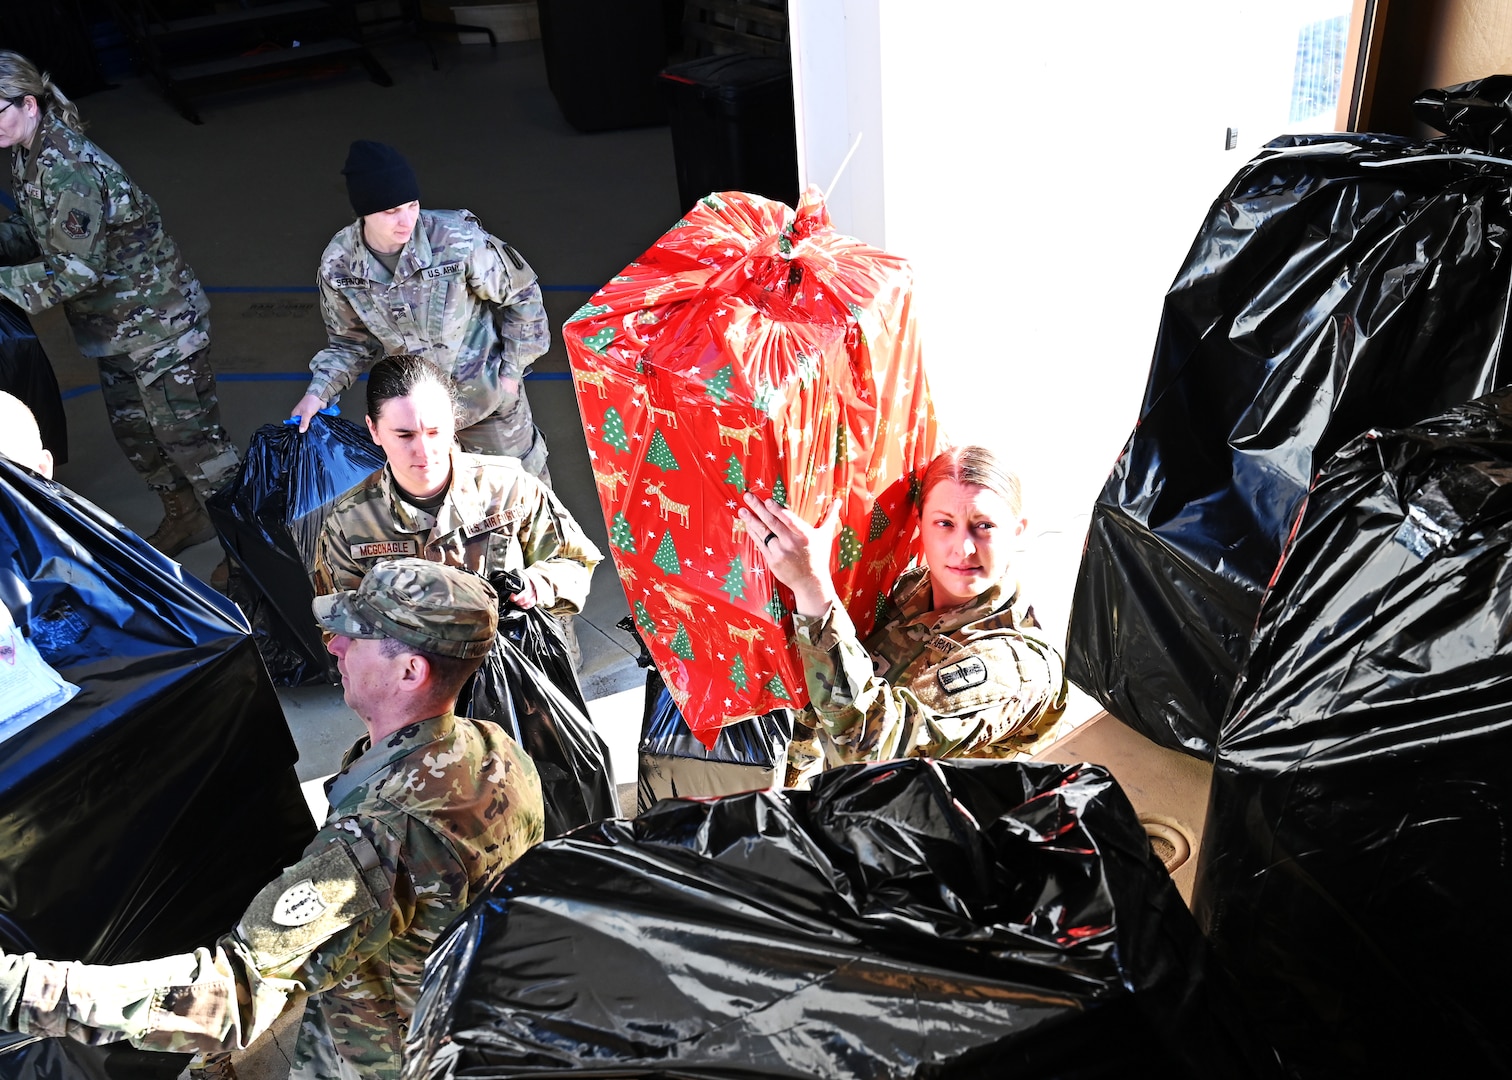 Spc. Kelly Boyer of the 603rd Public Affairs Detachment, NHARNG, loads a donated Christmas gift onto a delivery truck Dec. 13, 2022, at the state military reservation in Concord.